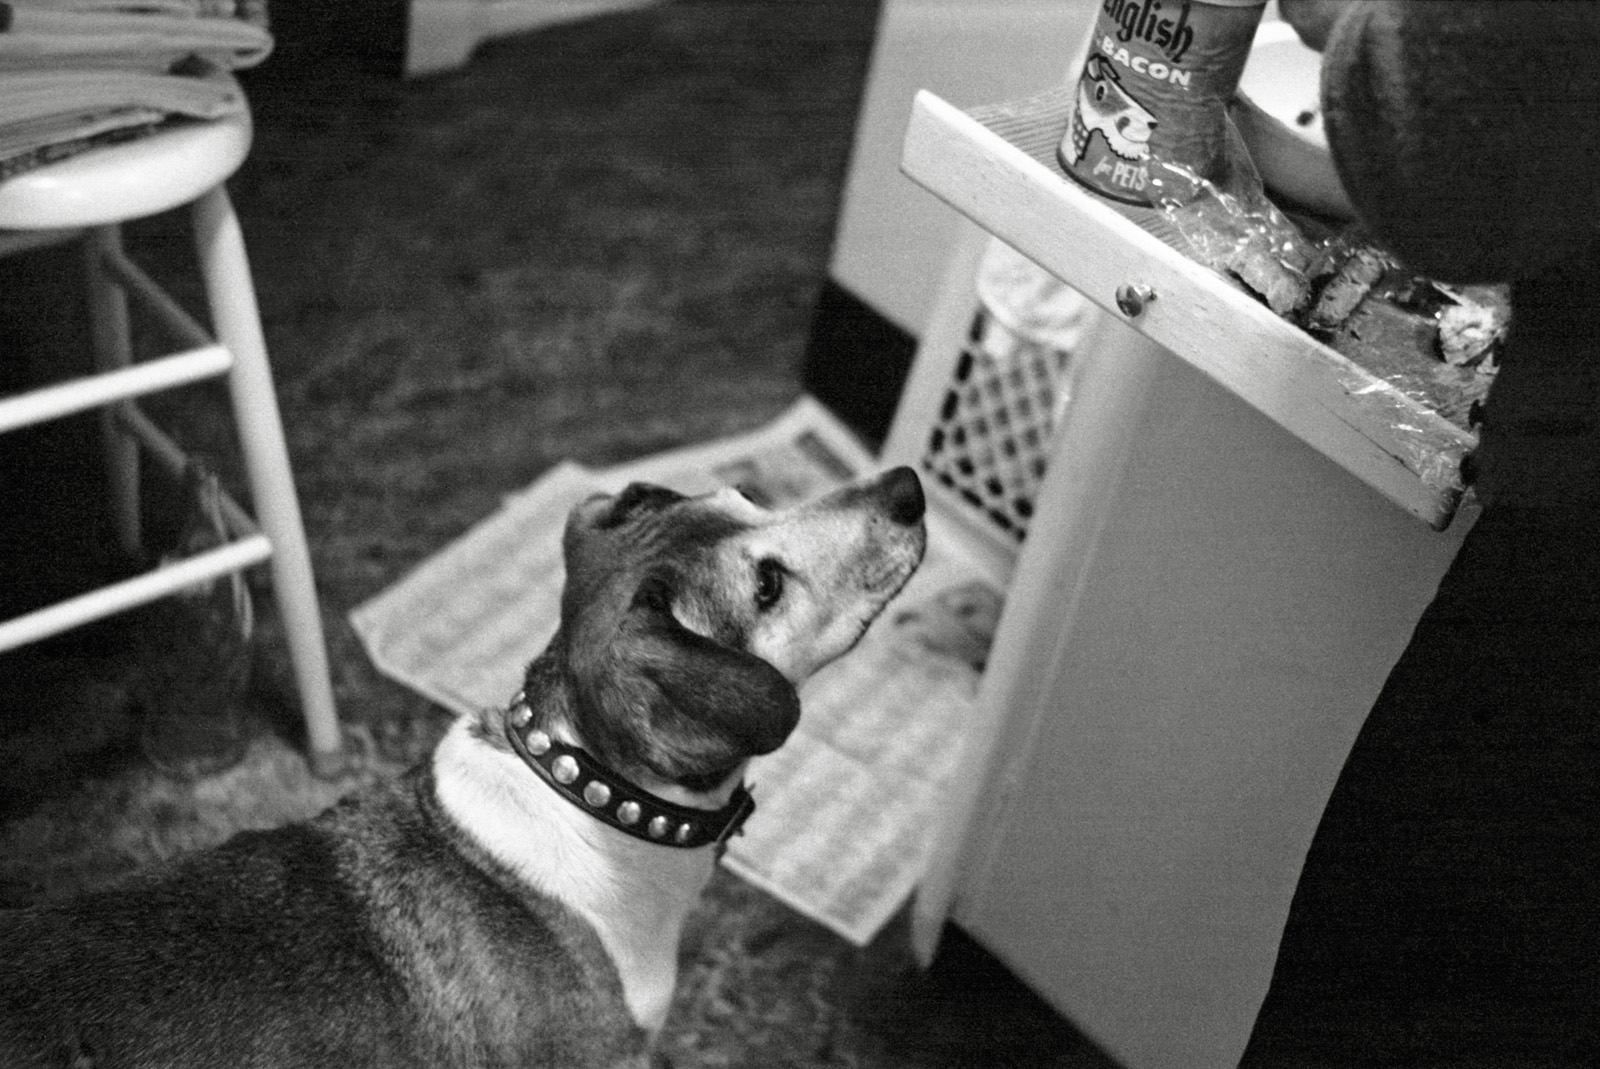 Bacon-flavored dog food! You sure can't say we didn't pamper our Missie. Here Mother appears to be supplementing it with some strips of leftover steak. Missie had been a foundling, rescued as a months-old pup by a friend's family as she scrounged for food on a beach along the Russian River. She never lost that knack, each day making her regular rounds of the neighbors who always had some treat waiting for her. She developed quite a gut. Nevertheless, she was a born tracker, and delighted in romping through the woods after deer for hours when we'd go on hikes, then following our scent to wherever we'd gotten to in the meantime. We were astonished one day early on when for the first time she actually pointed at some lurking critter. That hunting instinct didn't always end well; she tangled with a skunk once, and one day came home with a small gash in her side, we assumed from an encounter with a raccoon. Her orphan days didn't sour her on the Russian River, because she loved frolicking on the sand and in the water at the beach near our Guernewood summer place. She was with us for just another year after I took this 35mm Tri-X negative in the Salmon Kitchen of our Larkspur, California home. View full size.